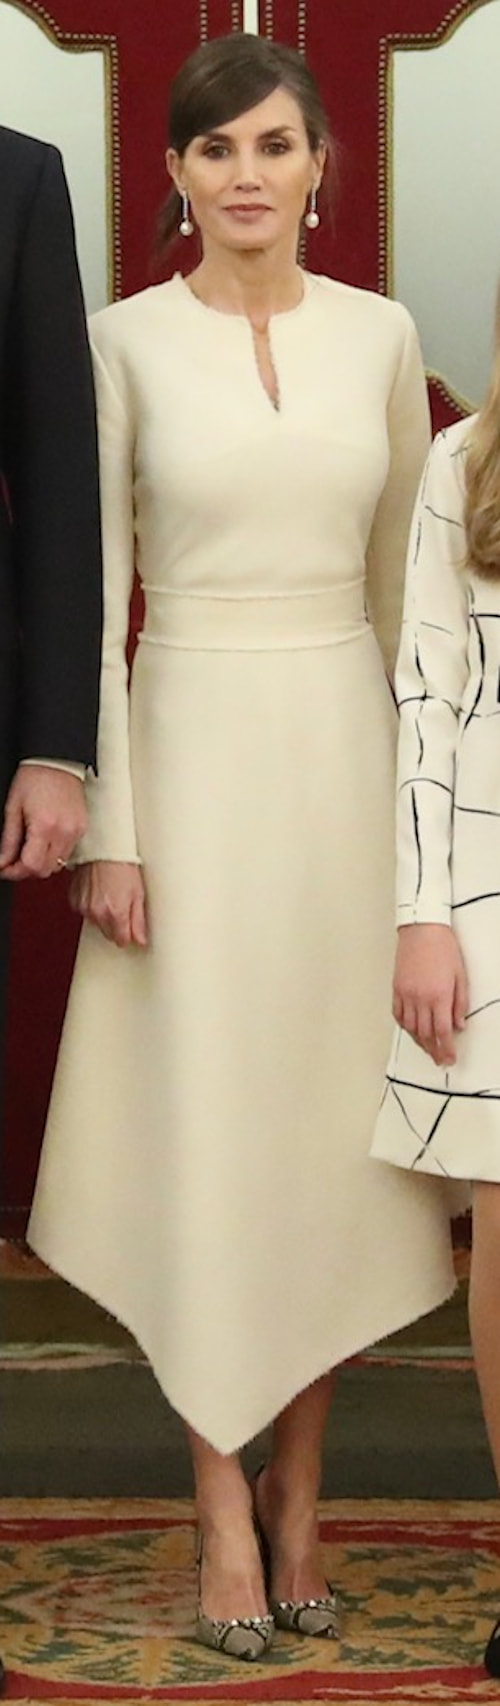 cream asymmetrical dress featuring frayed finishes for the for the Solemn Opening Ceremony of the XIV Legislature